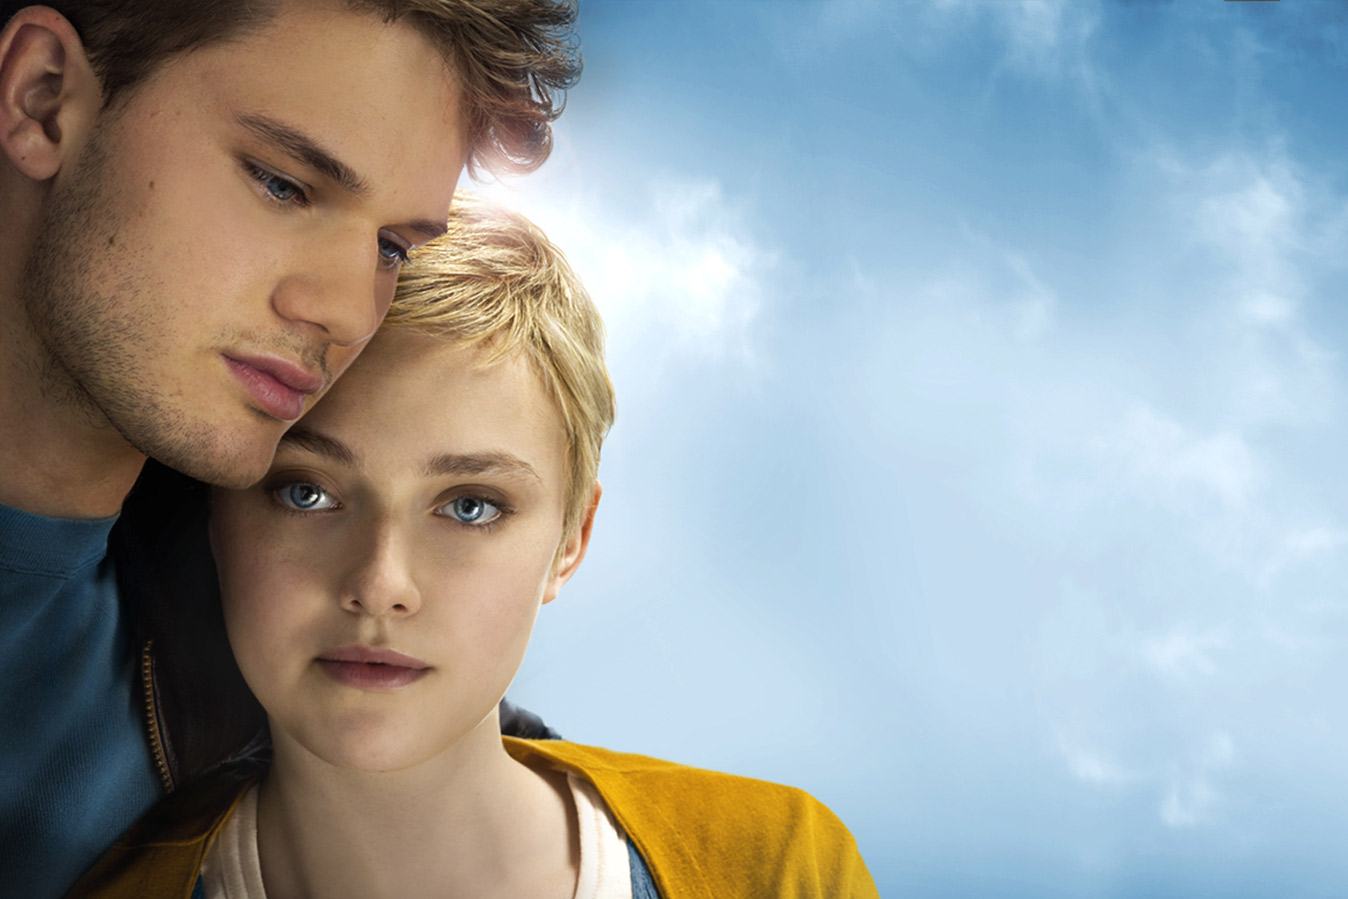 Now Is Good #1